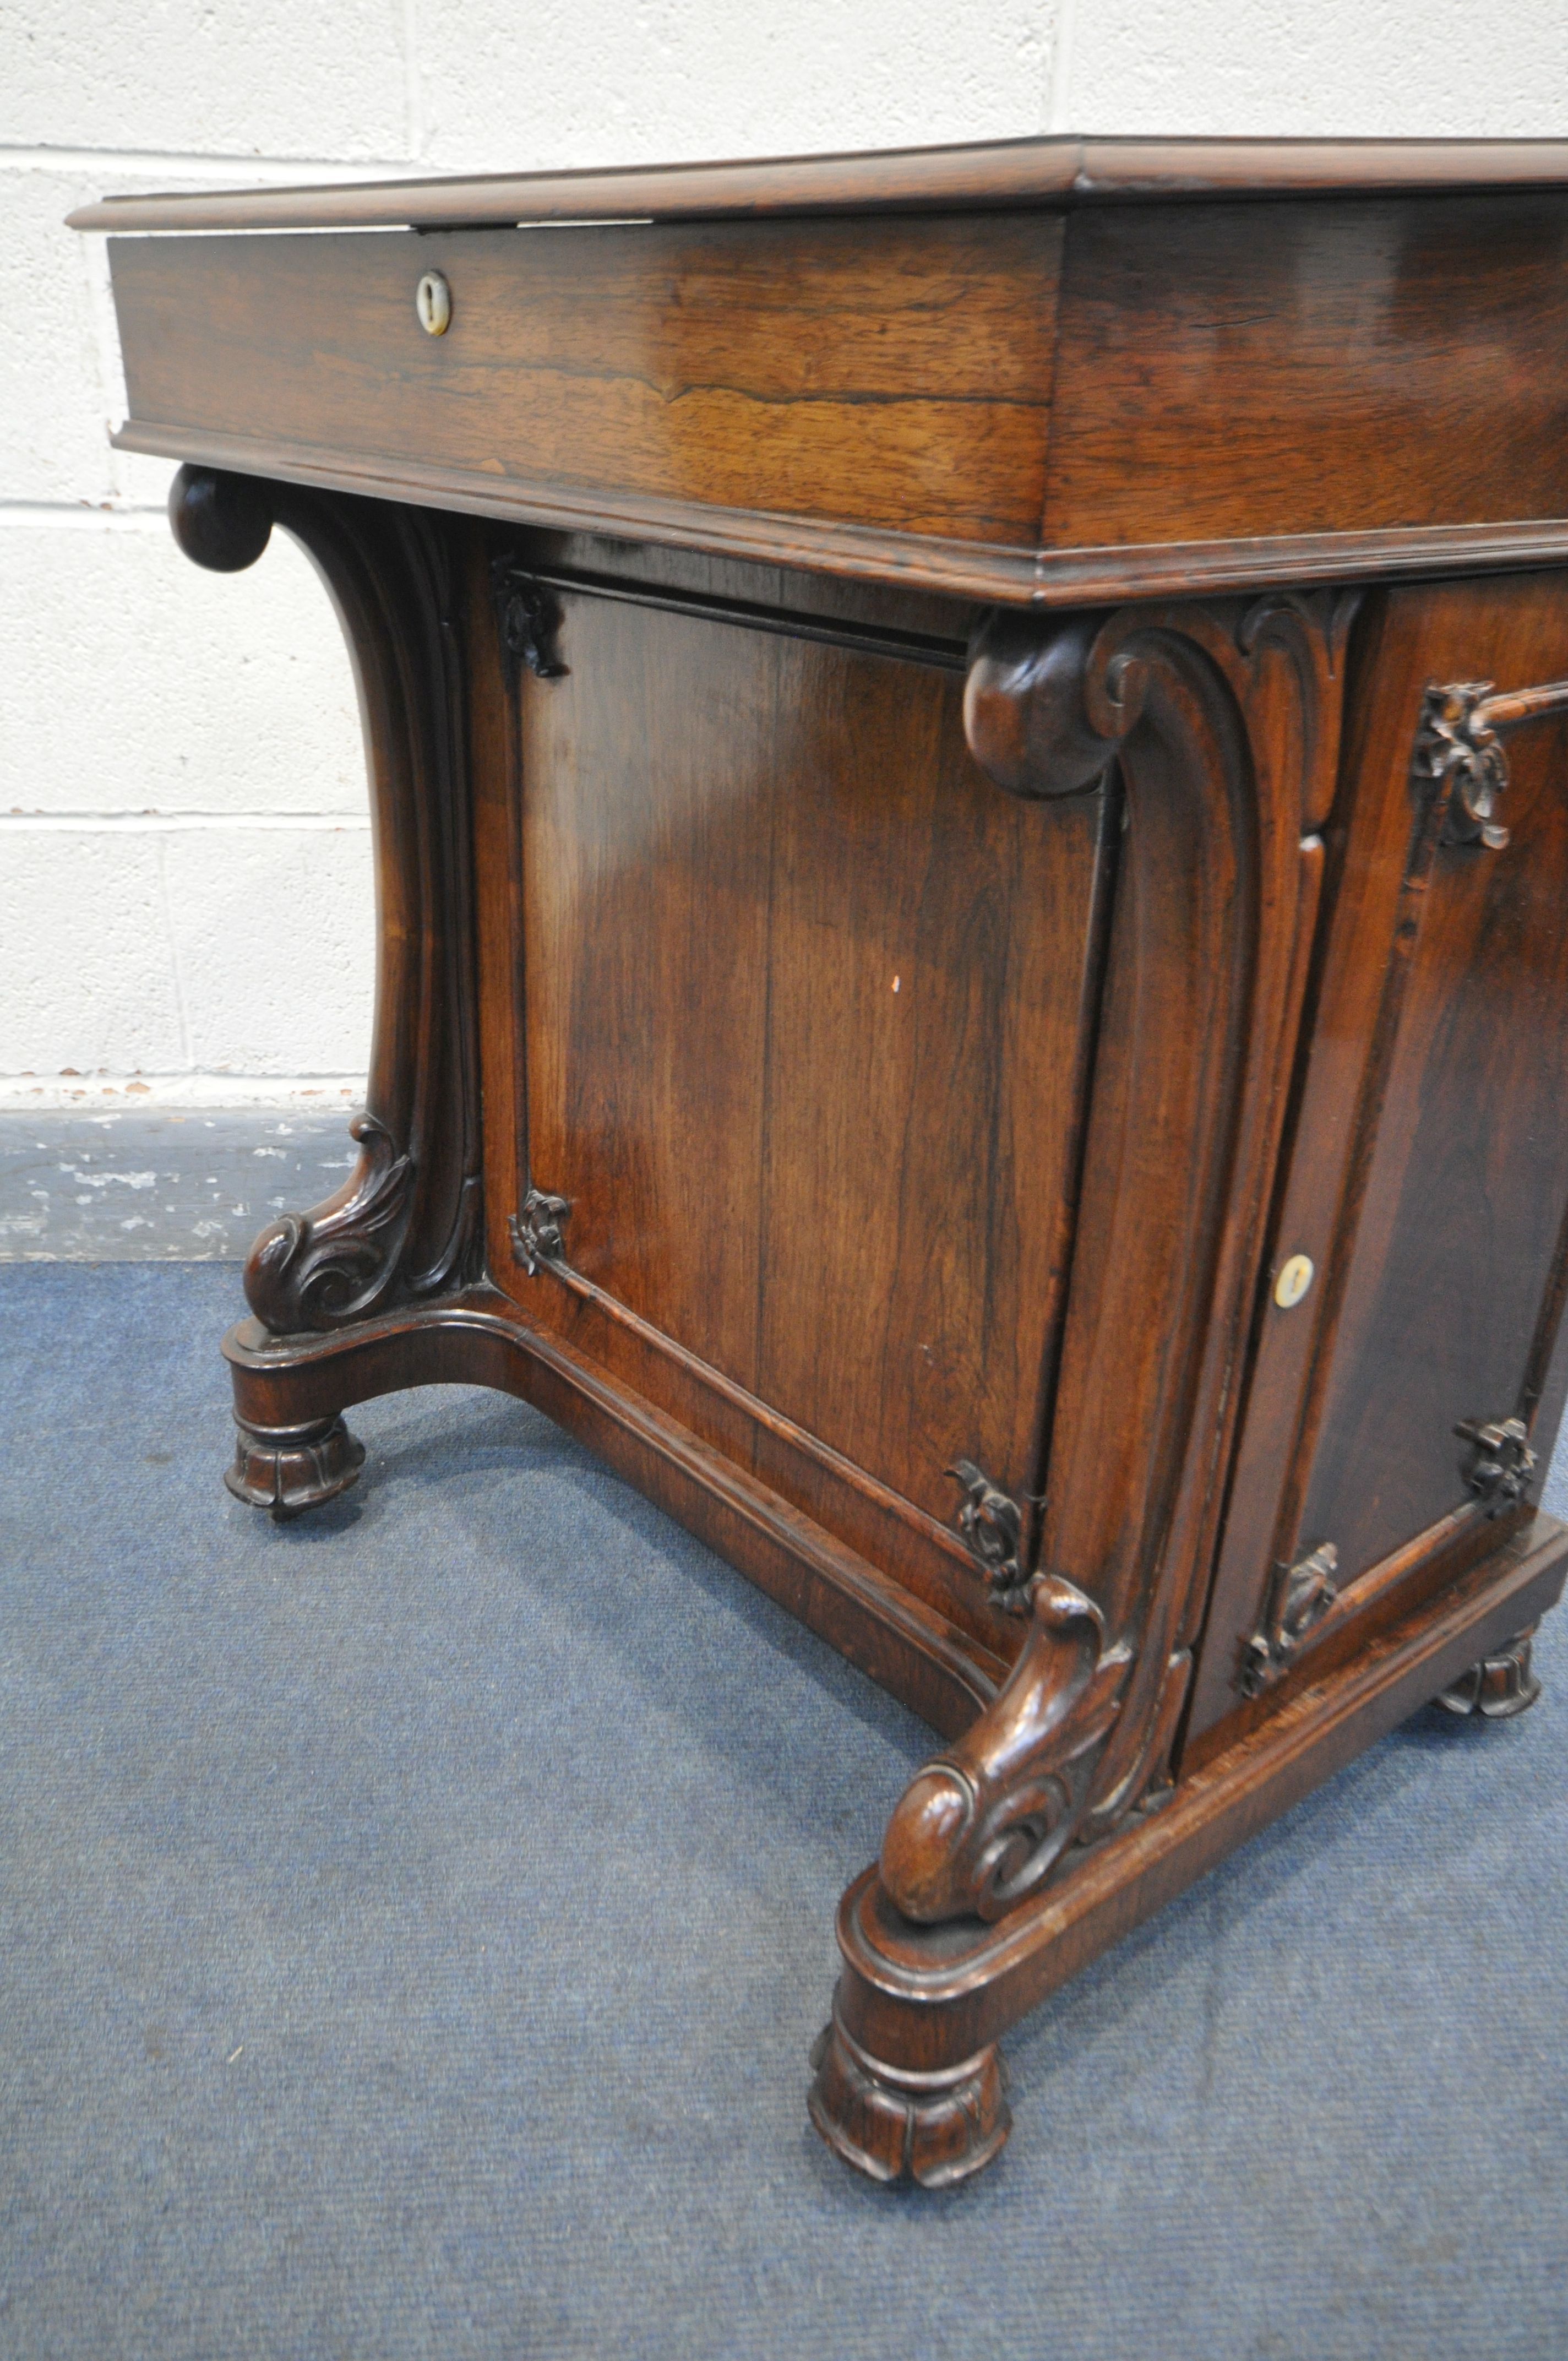 AN EARLY 19TH CENTURY ROSEWOOD DAVENPORT DESK, having a brass open fretwork gallery behind a leather - Image 6 of 9